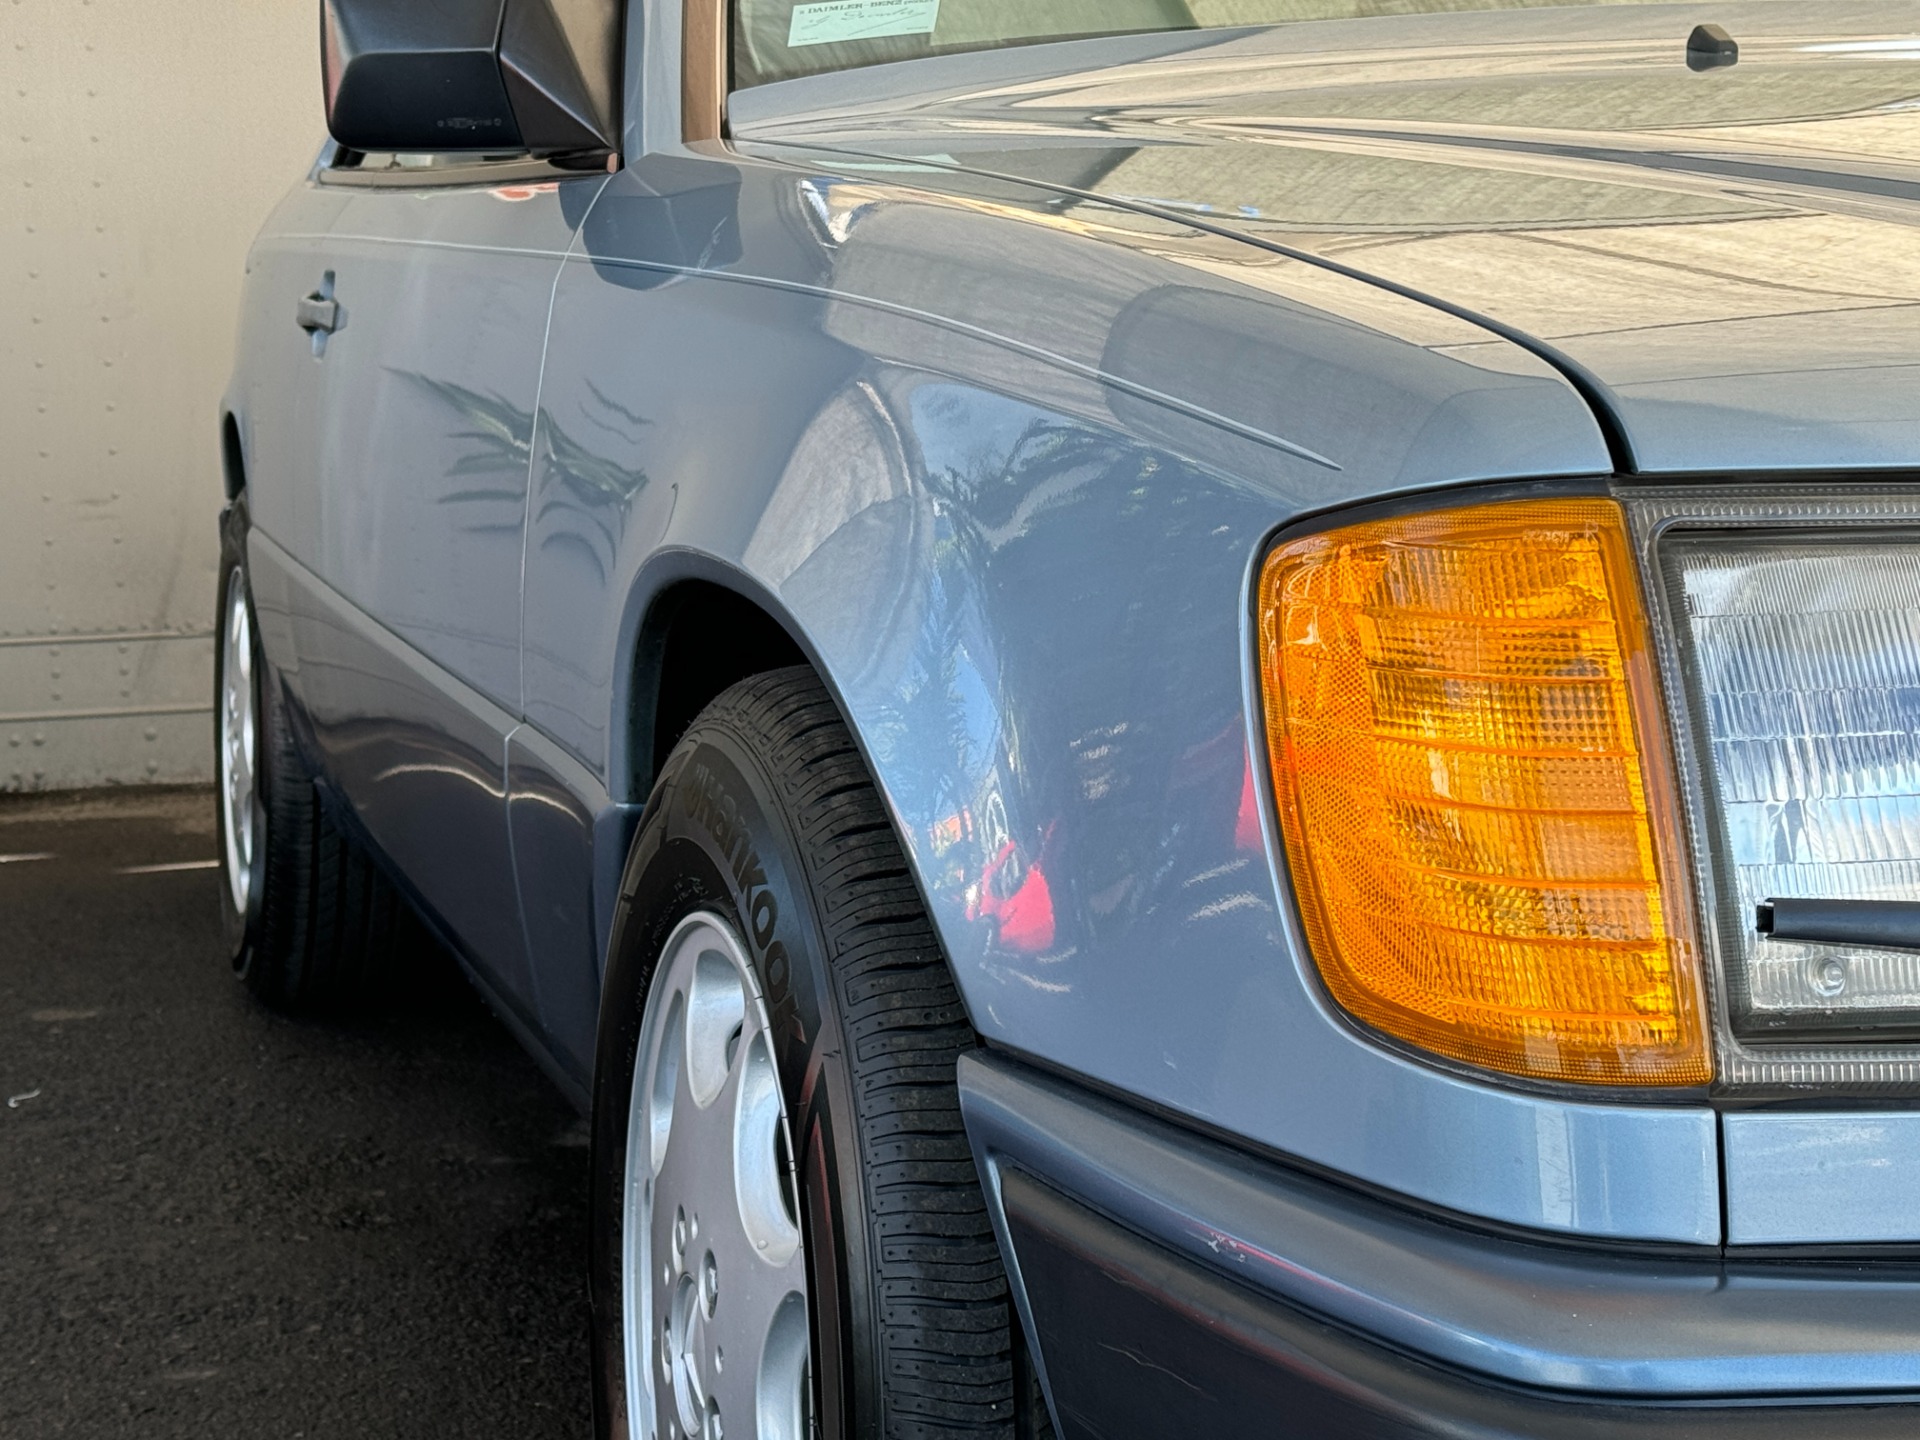 Used 1989 Mercedes Benz 300 CE